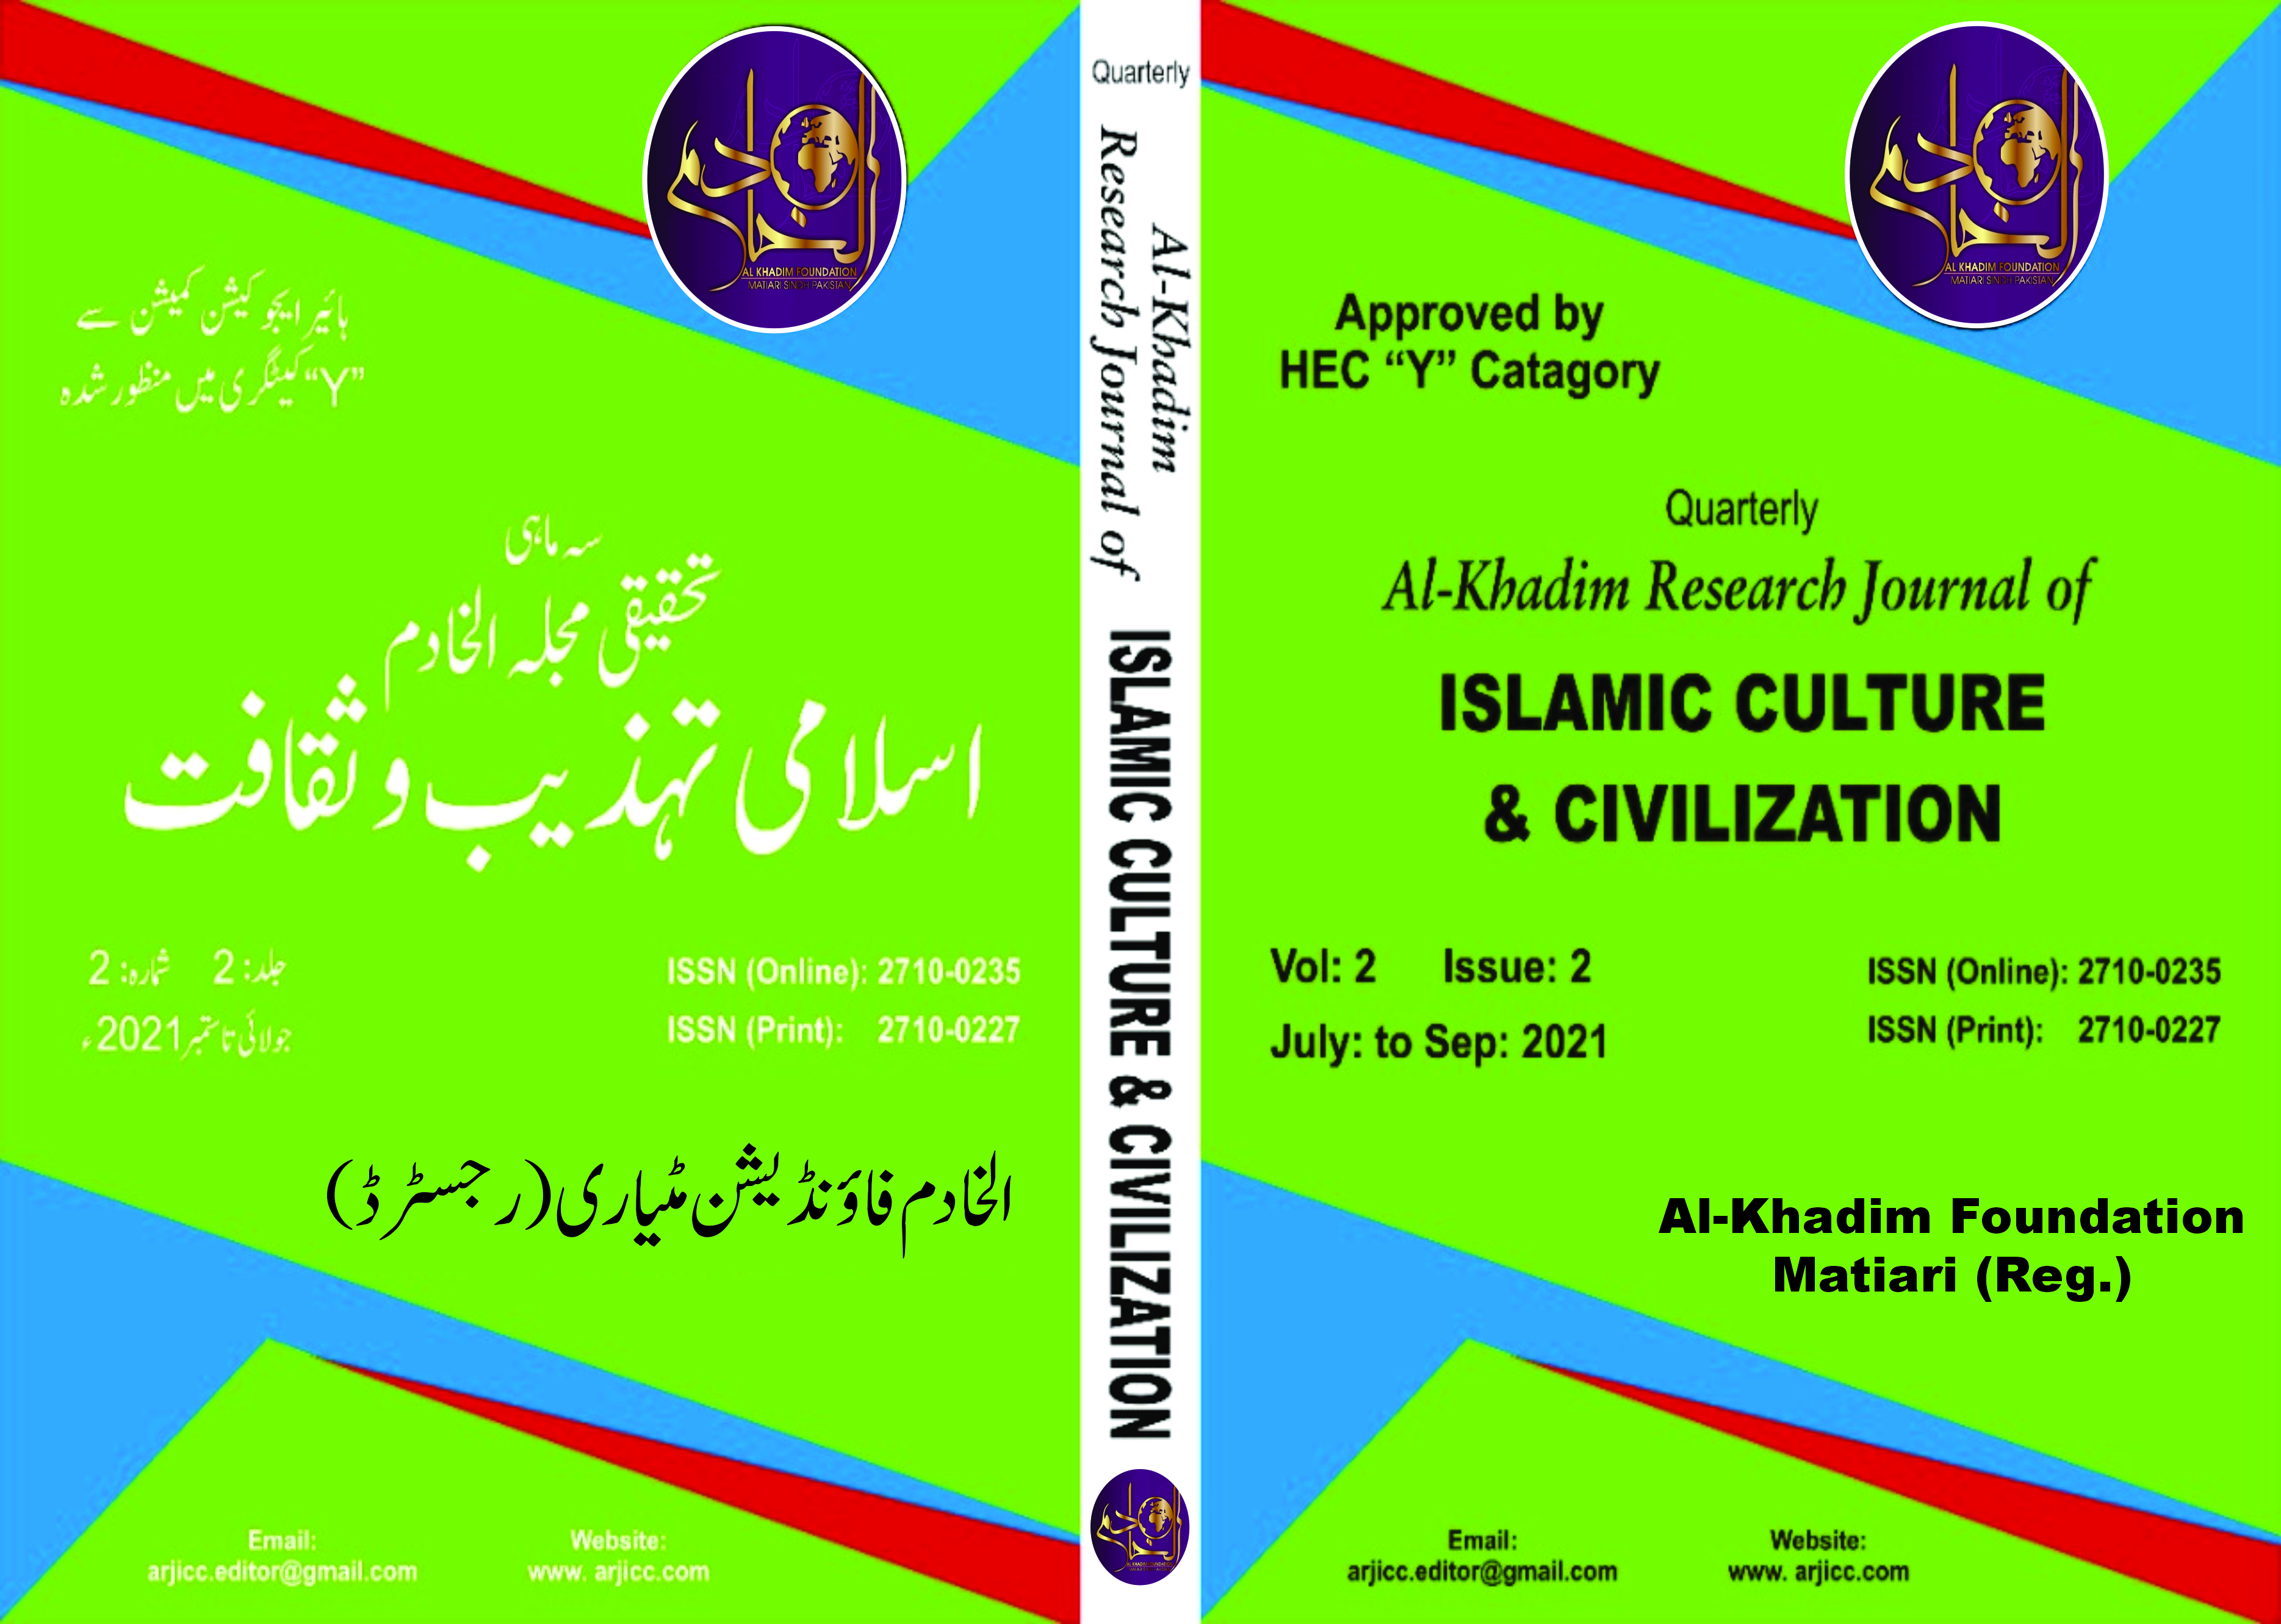 					View Vol. 2 No. 2 (2021): Al Khadim Research journal of Islamic culture and Civilization(July to September 2021)
				